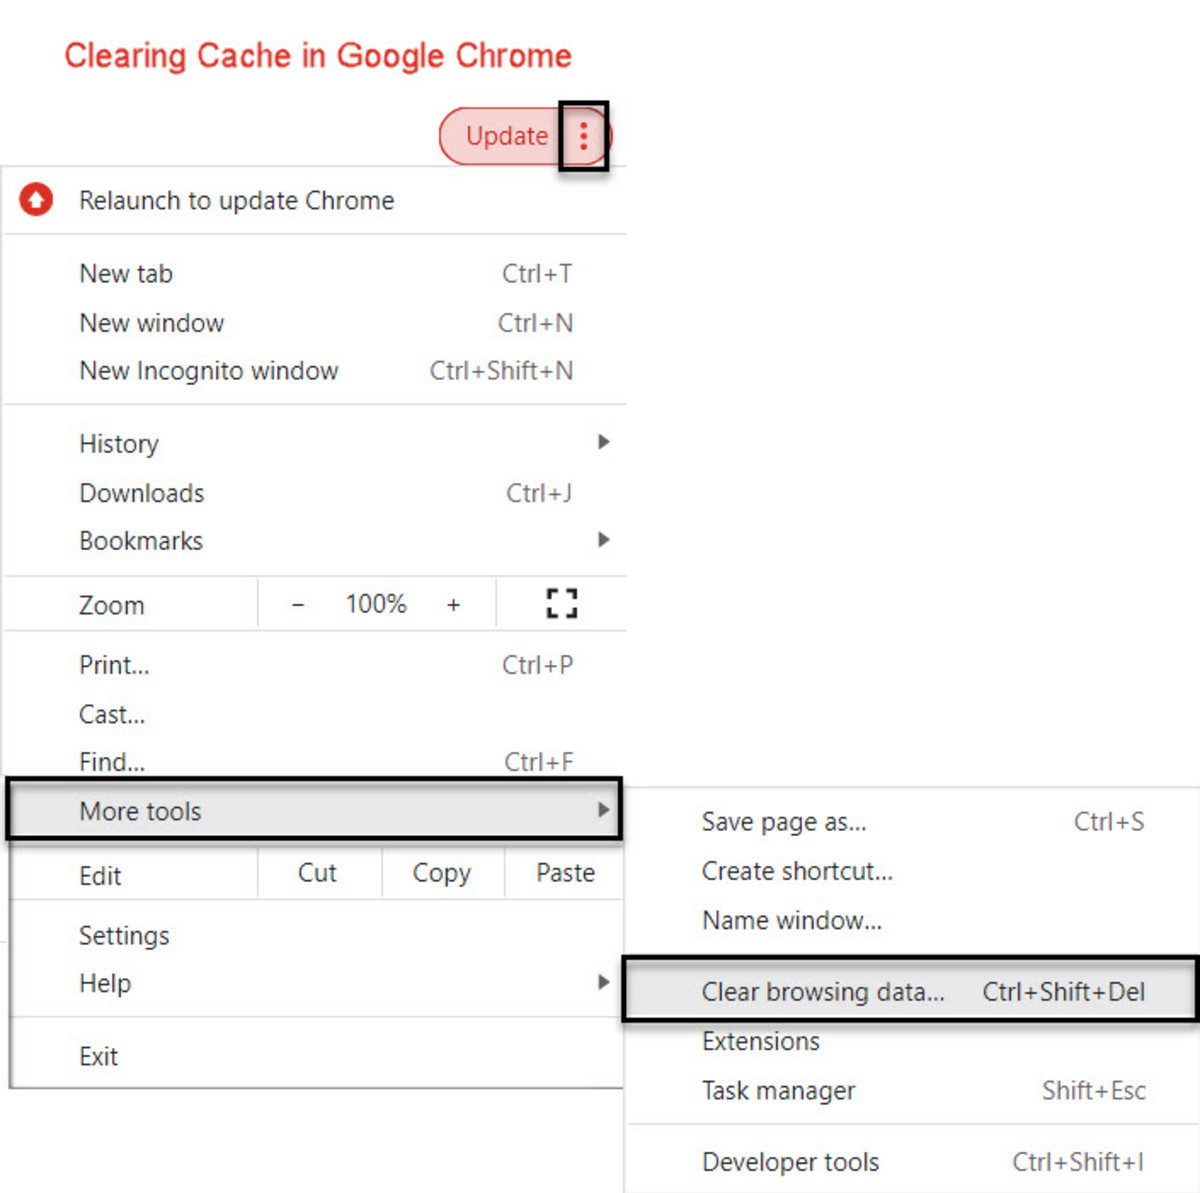 How to Clear Cache in Google Chrome, Click Vertical Ellipses for Menu, select More Tools, Clear Browsing Data